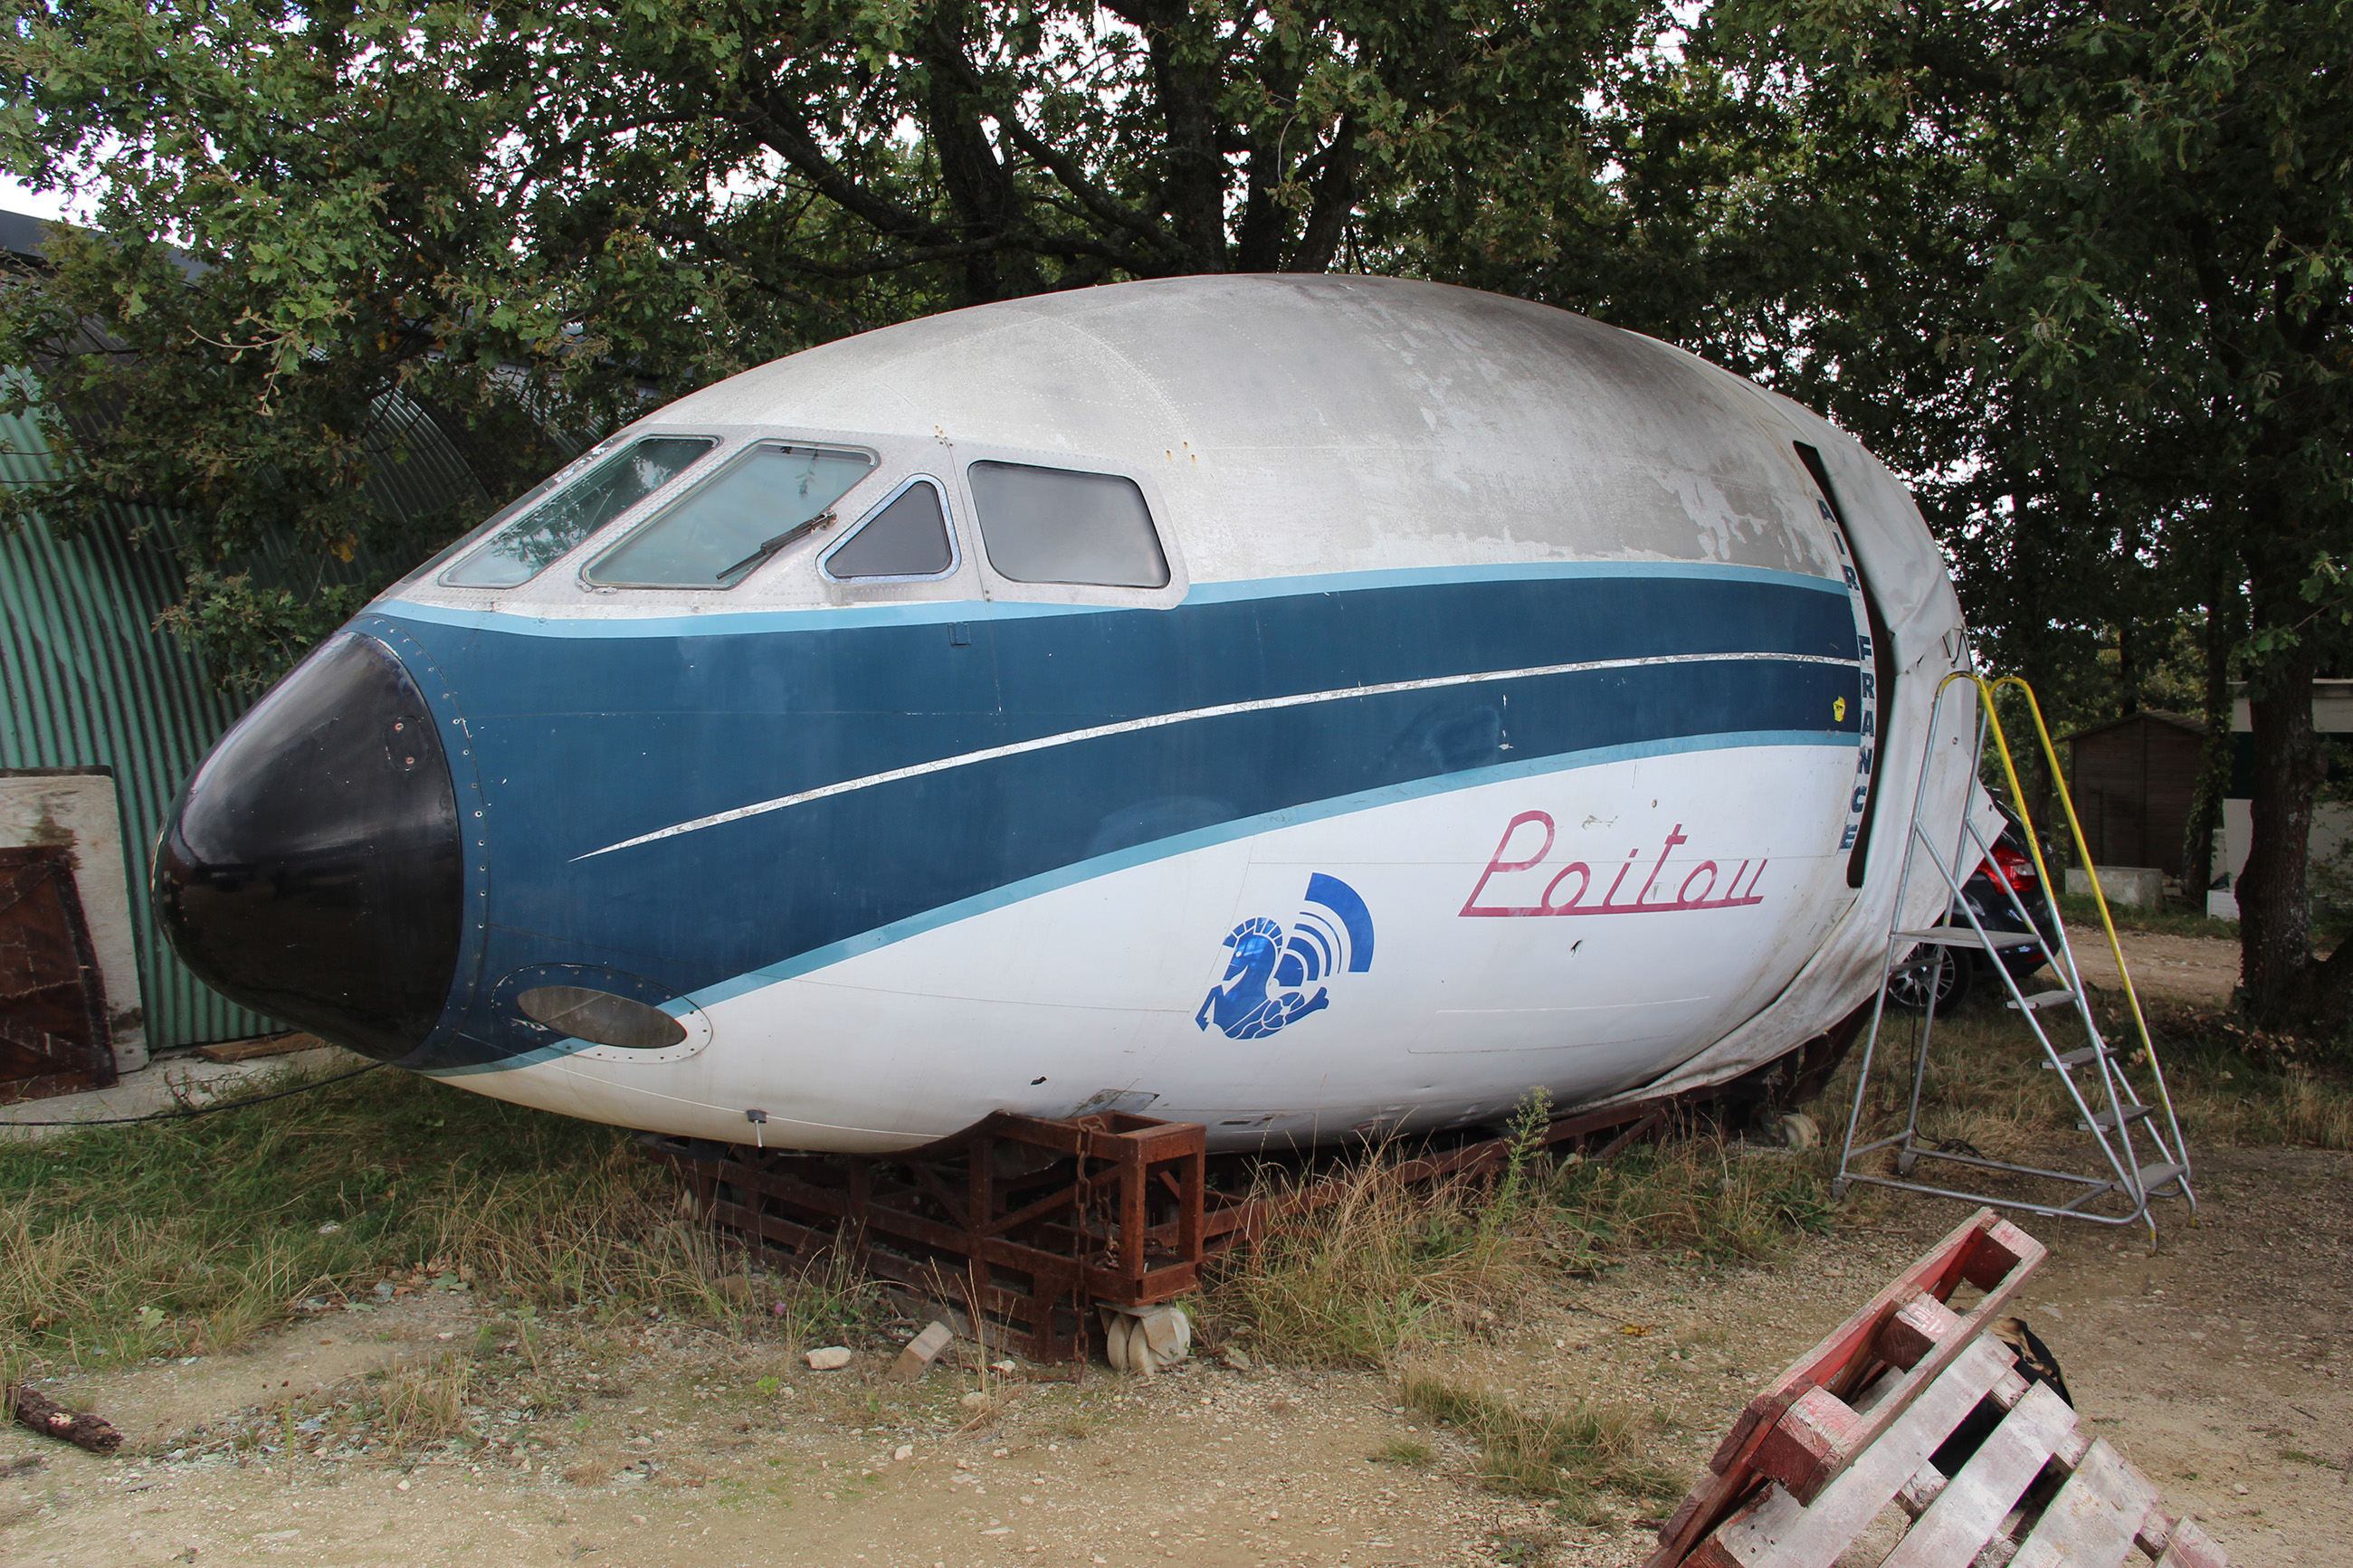 Nils Andersson's Caravelle cockpit as it sat forlornly under a tree just prior to his acquisition in 2012. (photo via Nils Andersson)